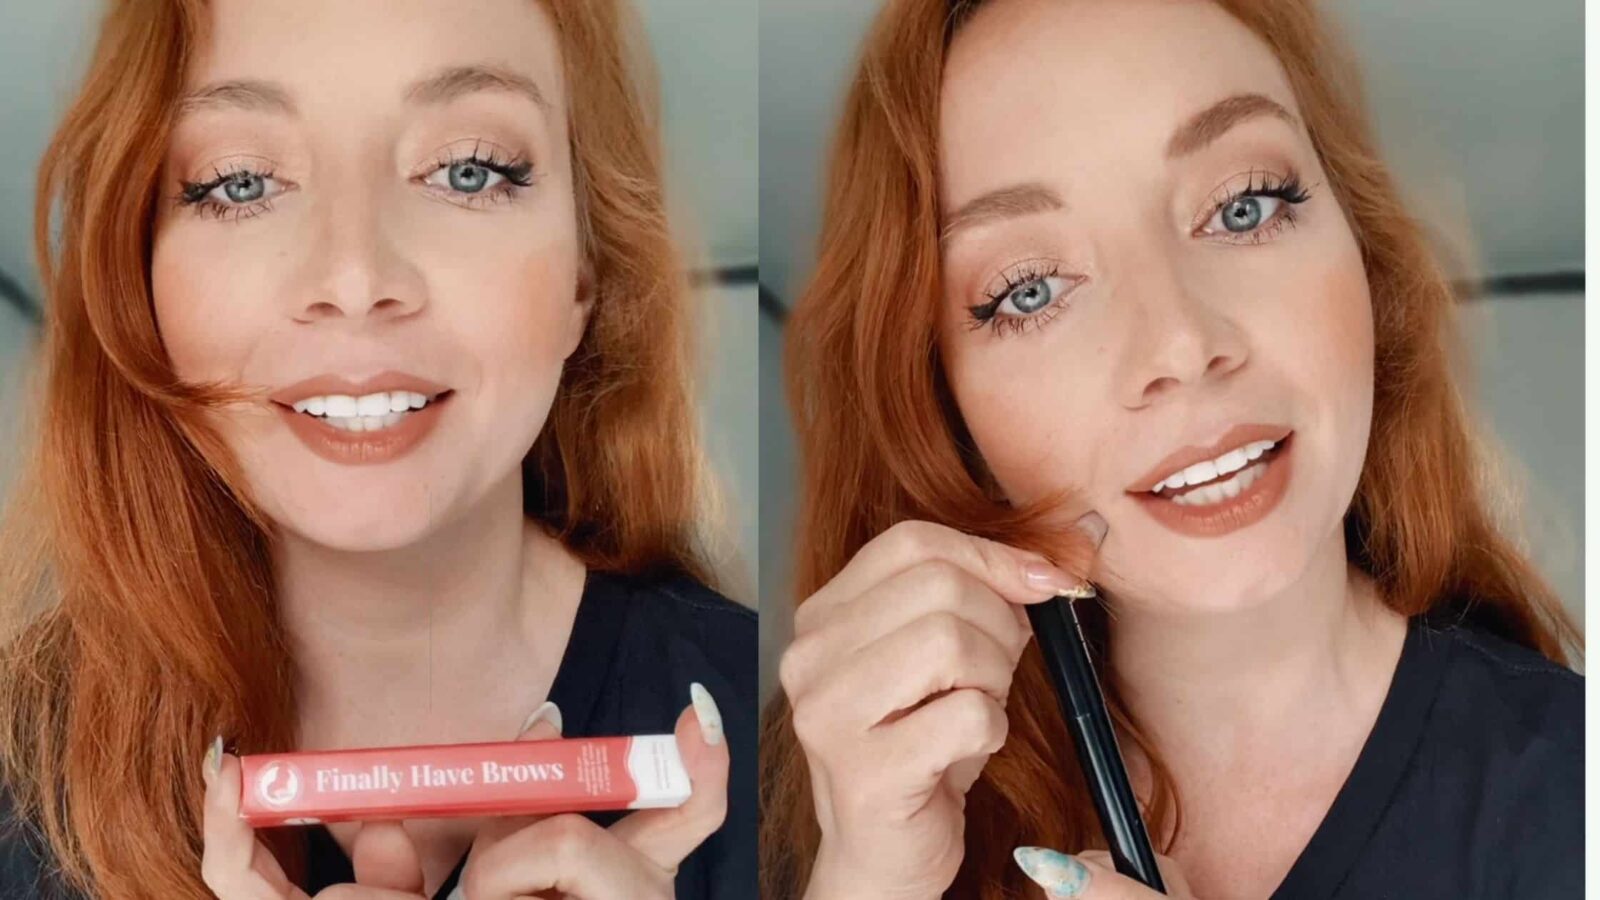 “Most Miraculous Product I’ve Ever Used” – The Redhead Eyebrow Gel, Finally Have Brows